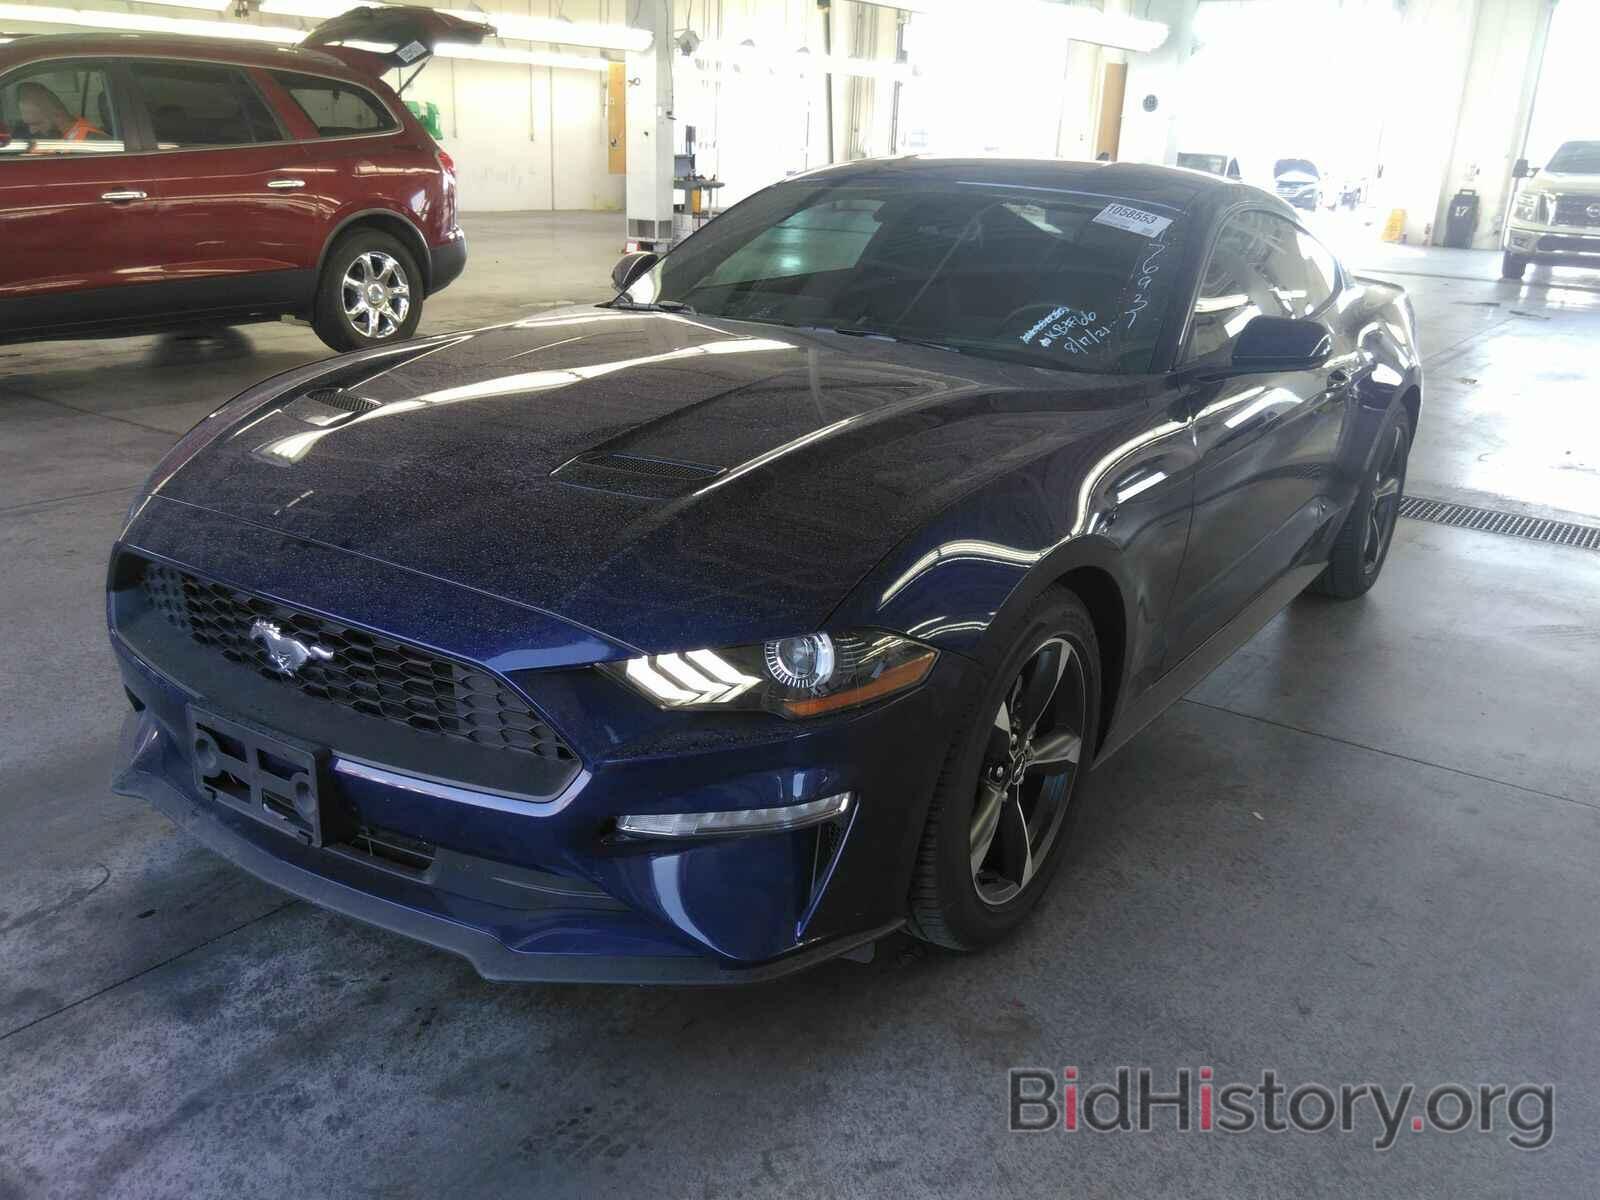 Photo 1FA6P8TH0L5176937 - Ford Mustang 2020